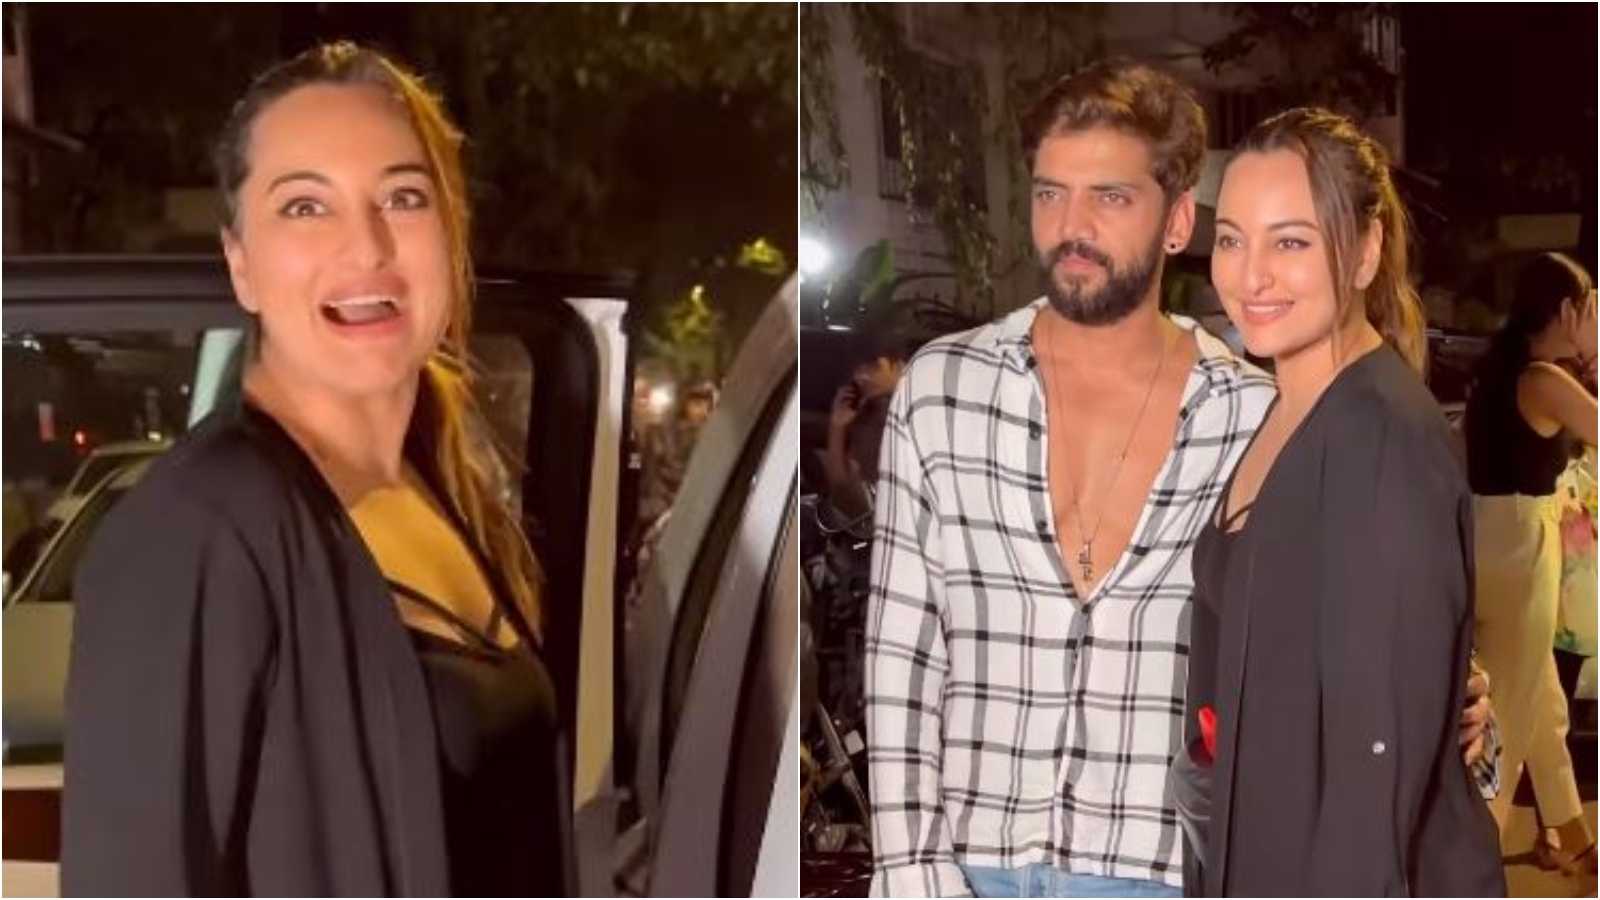 ‘Ladka to bhao nahi deta’: Sonakshi gets chatty with paps during a night out with rumoured BF Zaheer, netizens react